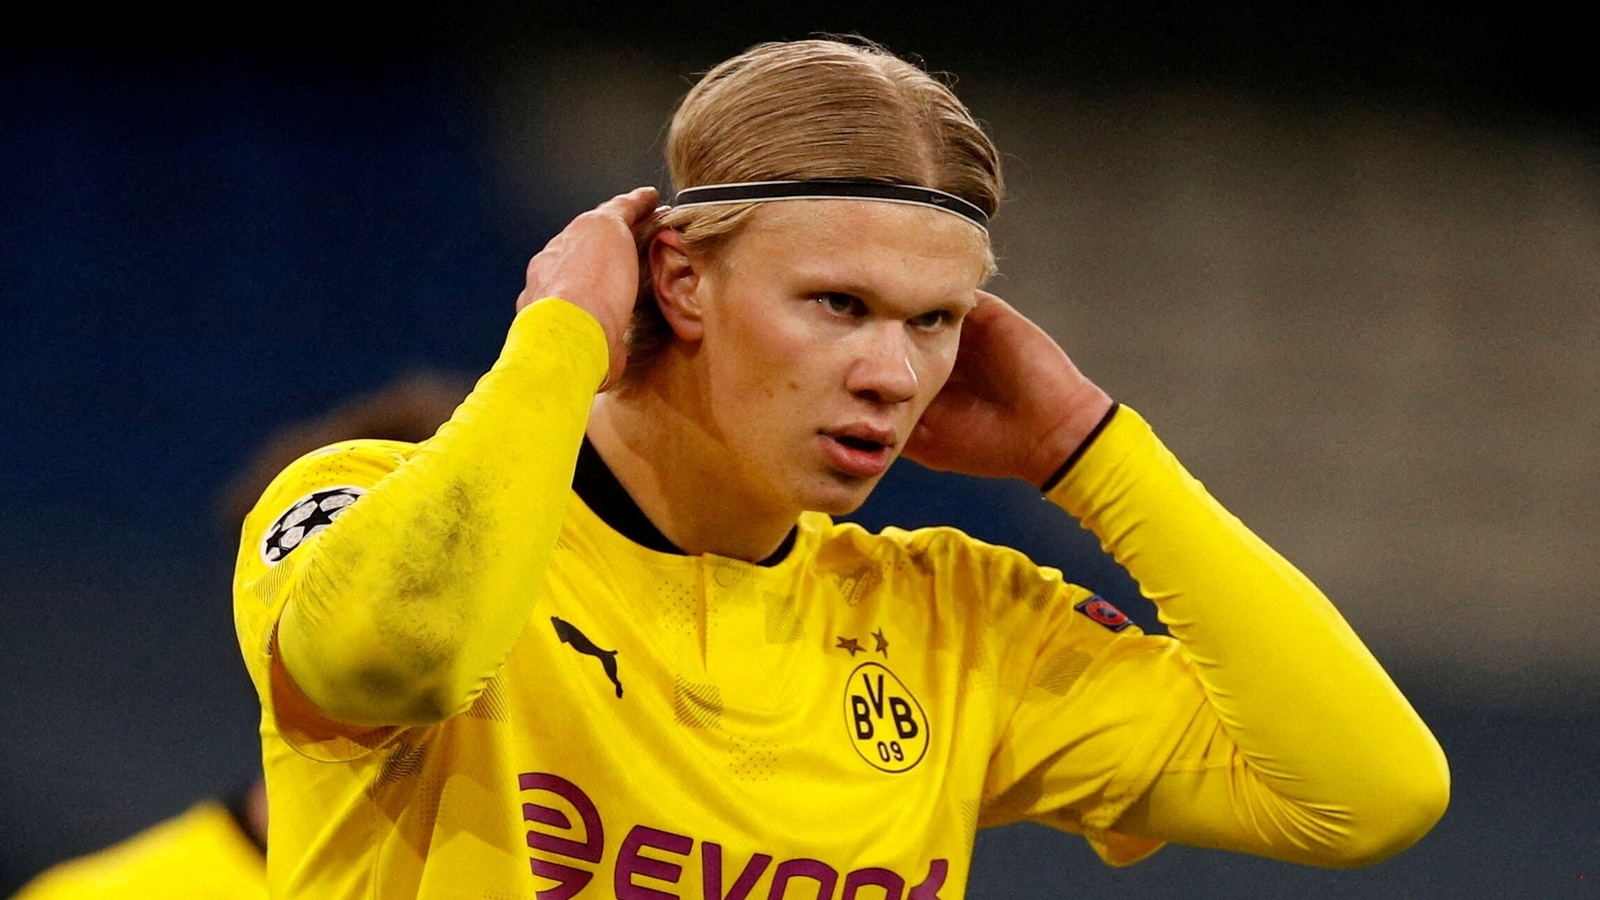 Manchester City reach agreement to sign Erling Haaland from Borussia Dortmund